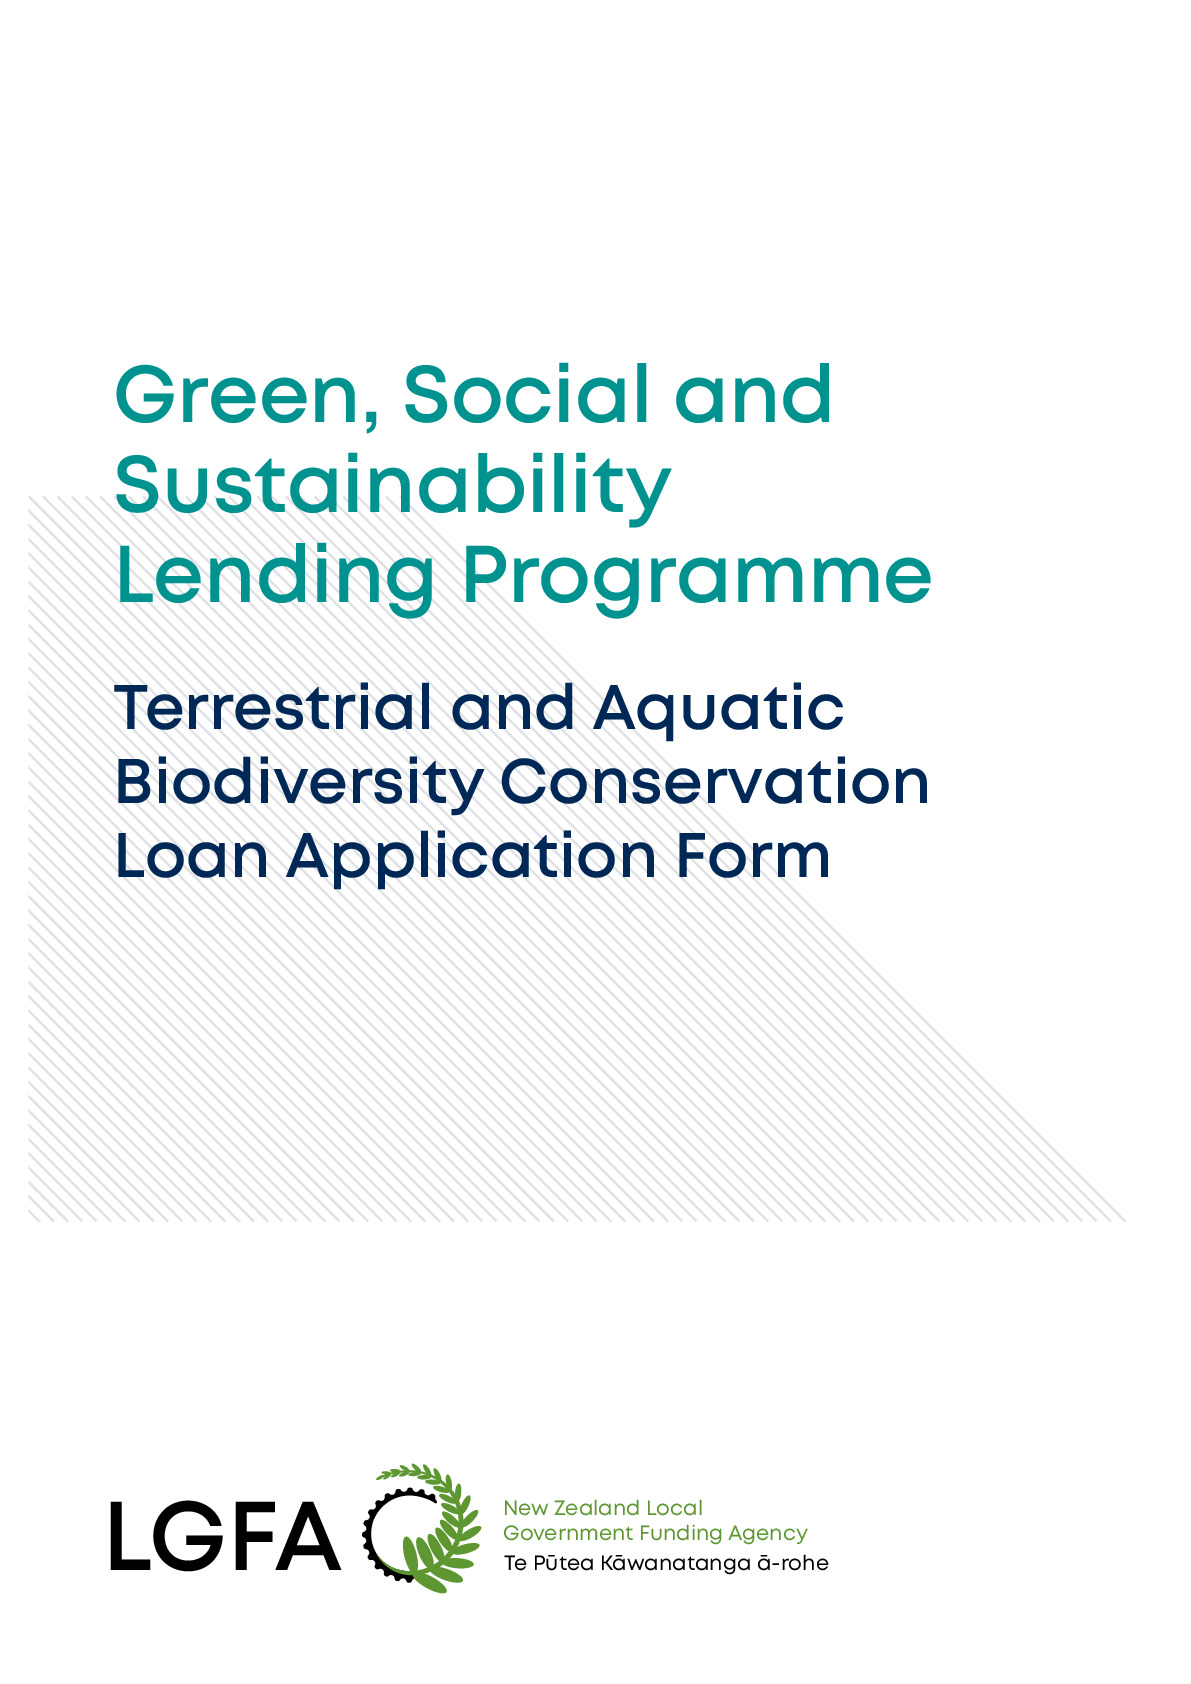 Terrestrial and Aquatic Biodiversity Conservation Loan Application Form 30092021 FINAL